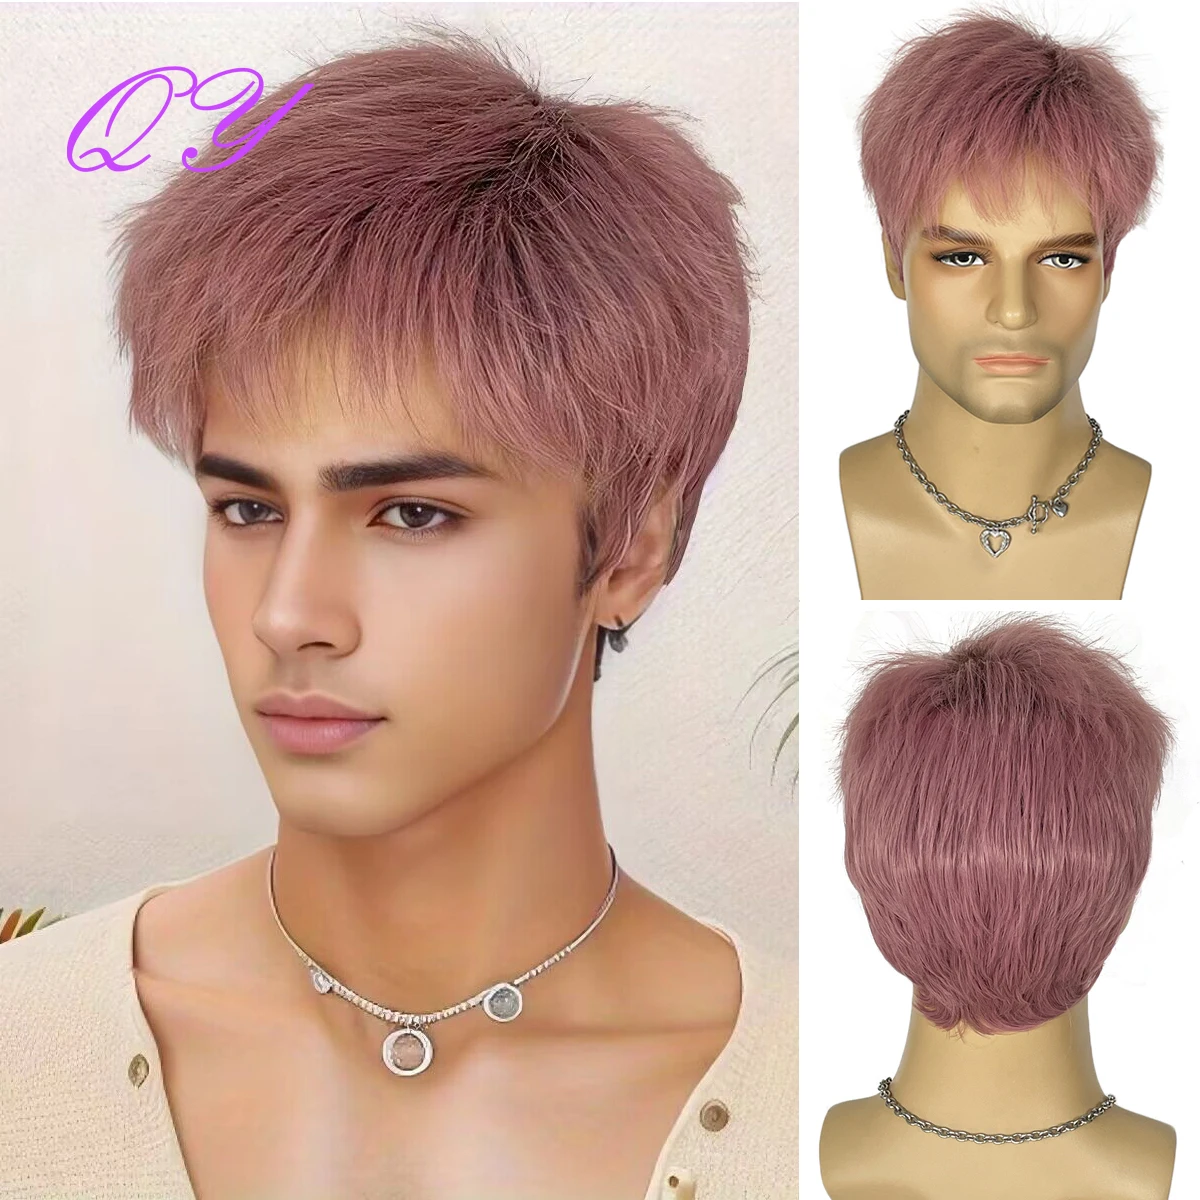 Synthetic Men Wig Short Pink Natural Straight With Bangs Cosplay Or Party Good Quality Adjustable Size Man Hair